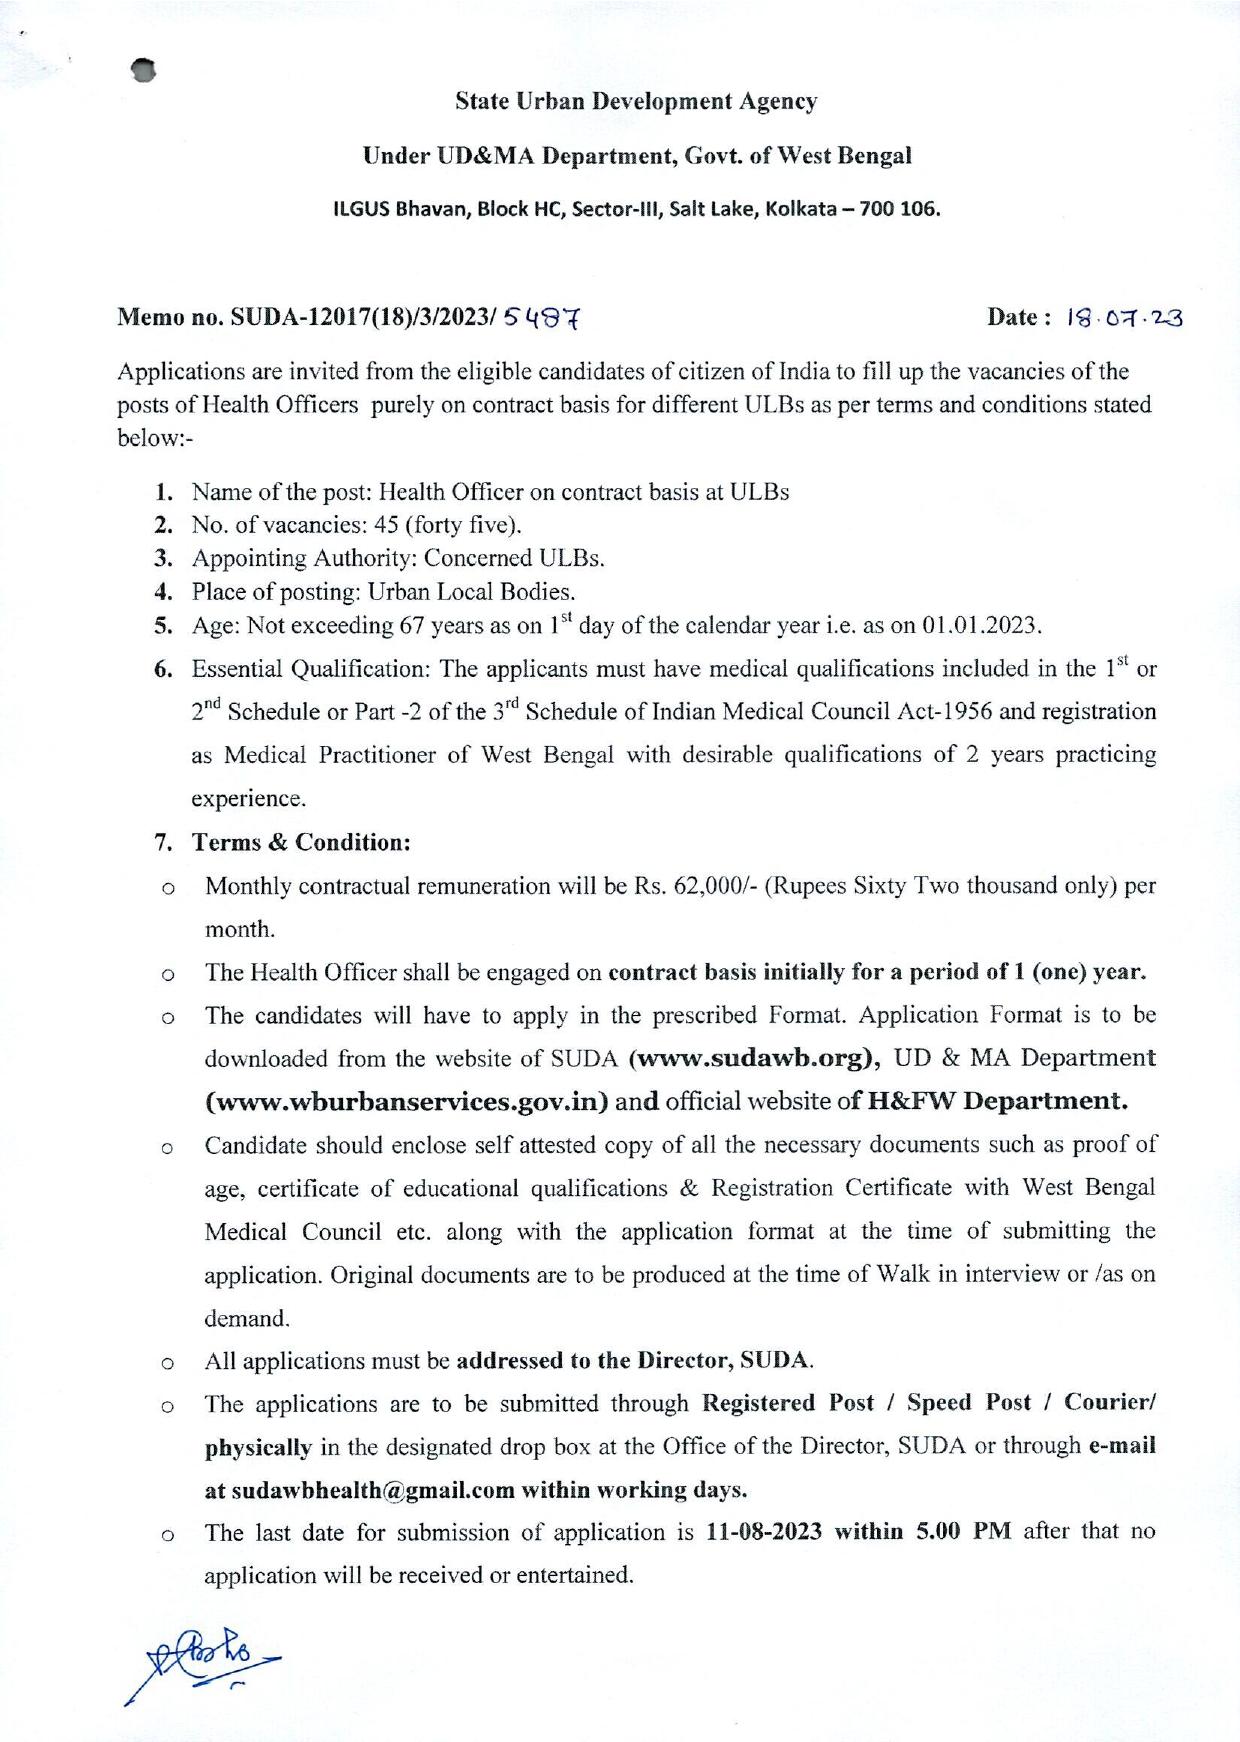 SUDA Health Officer Recruitment 2023 - Page 3